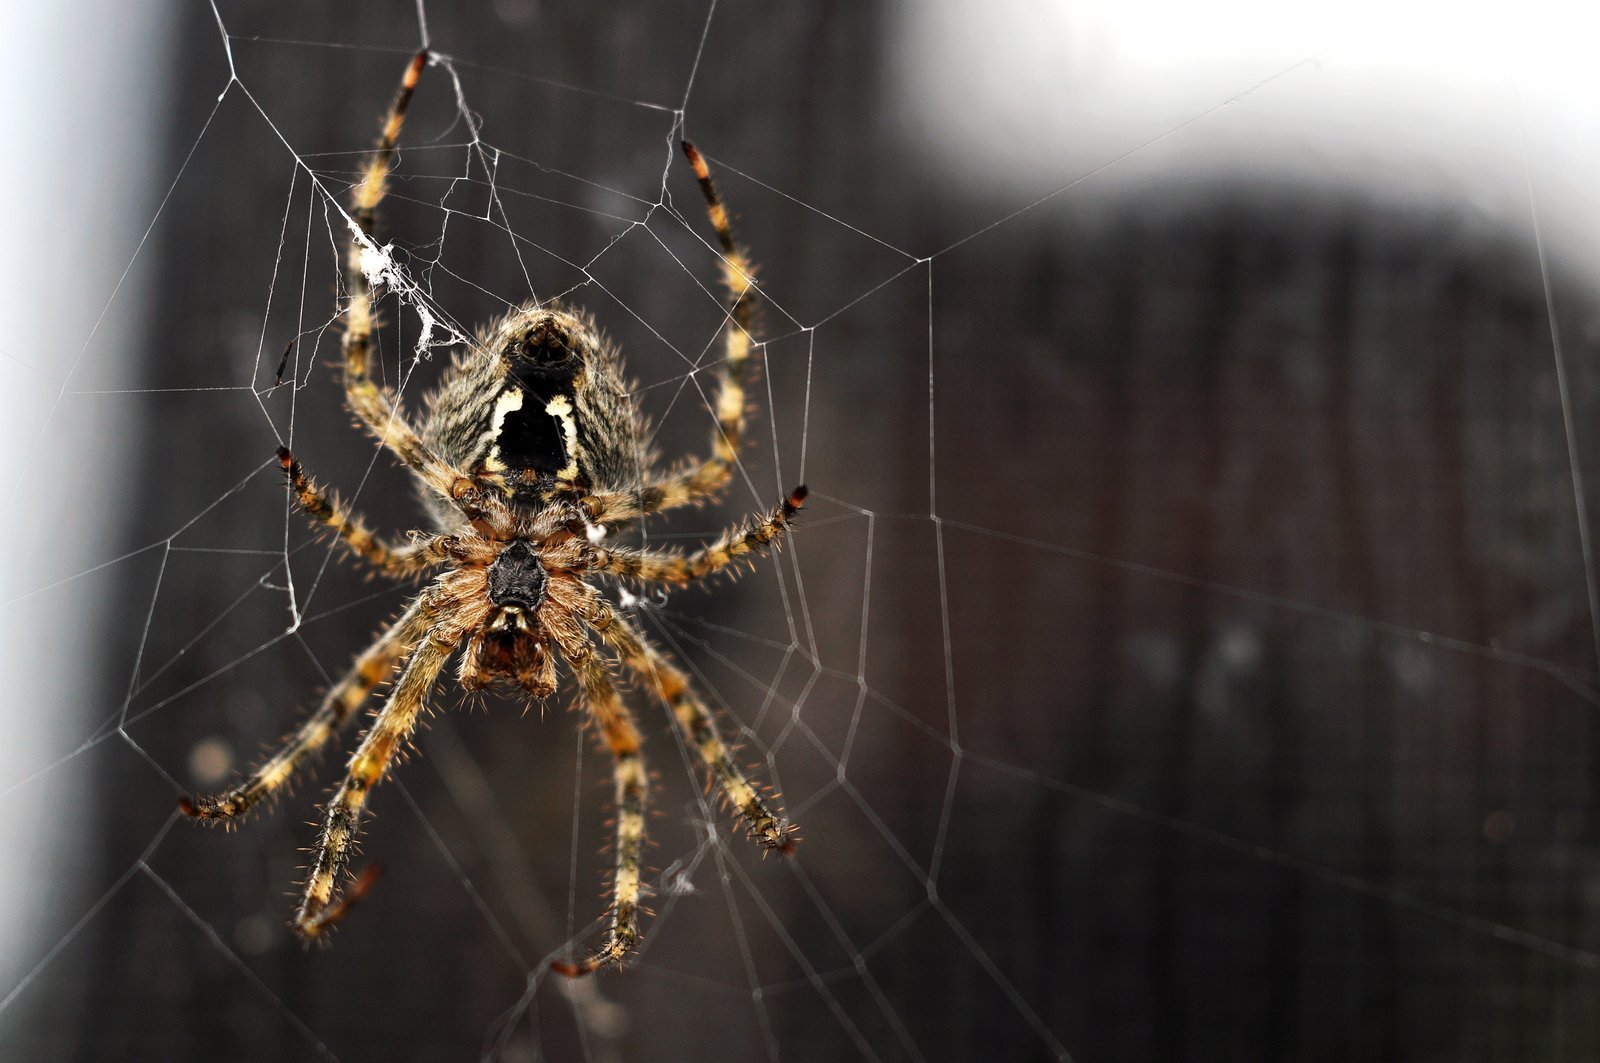 Arachnophobia, fear of spiders associated to human DNA Research